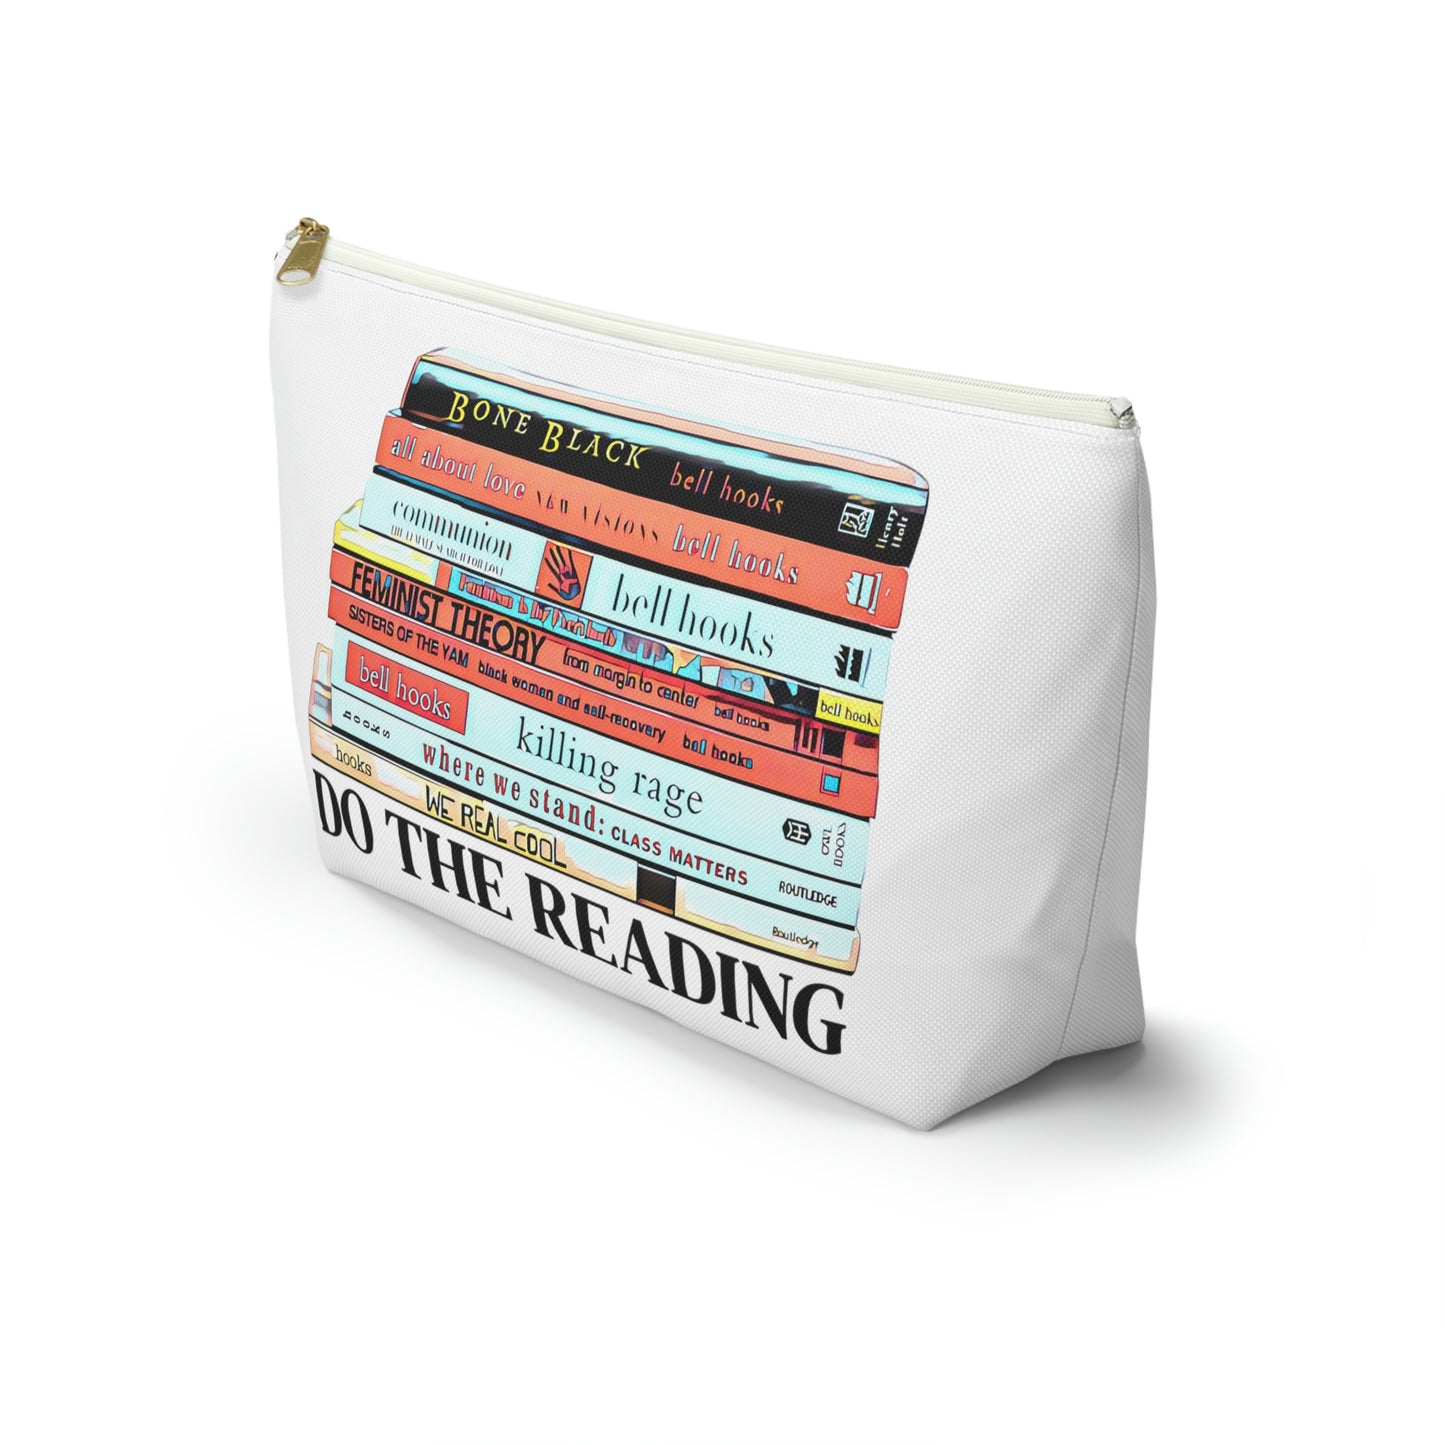 Do The Reading Pencil/Accessory Pouch